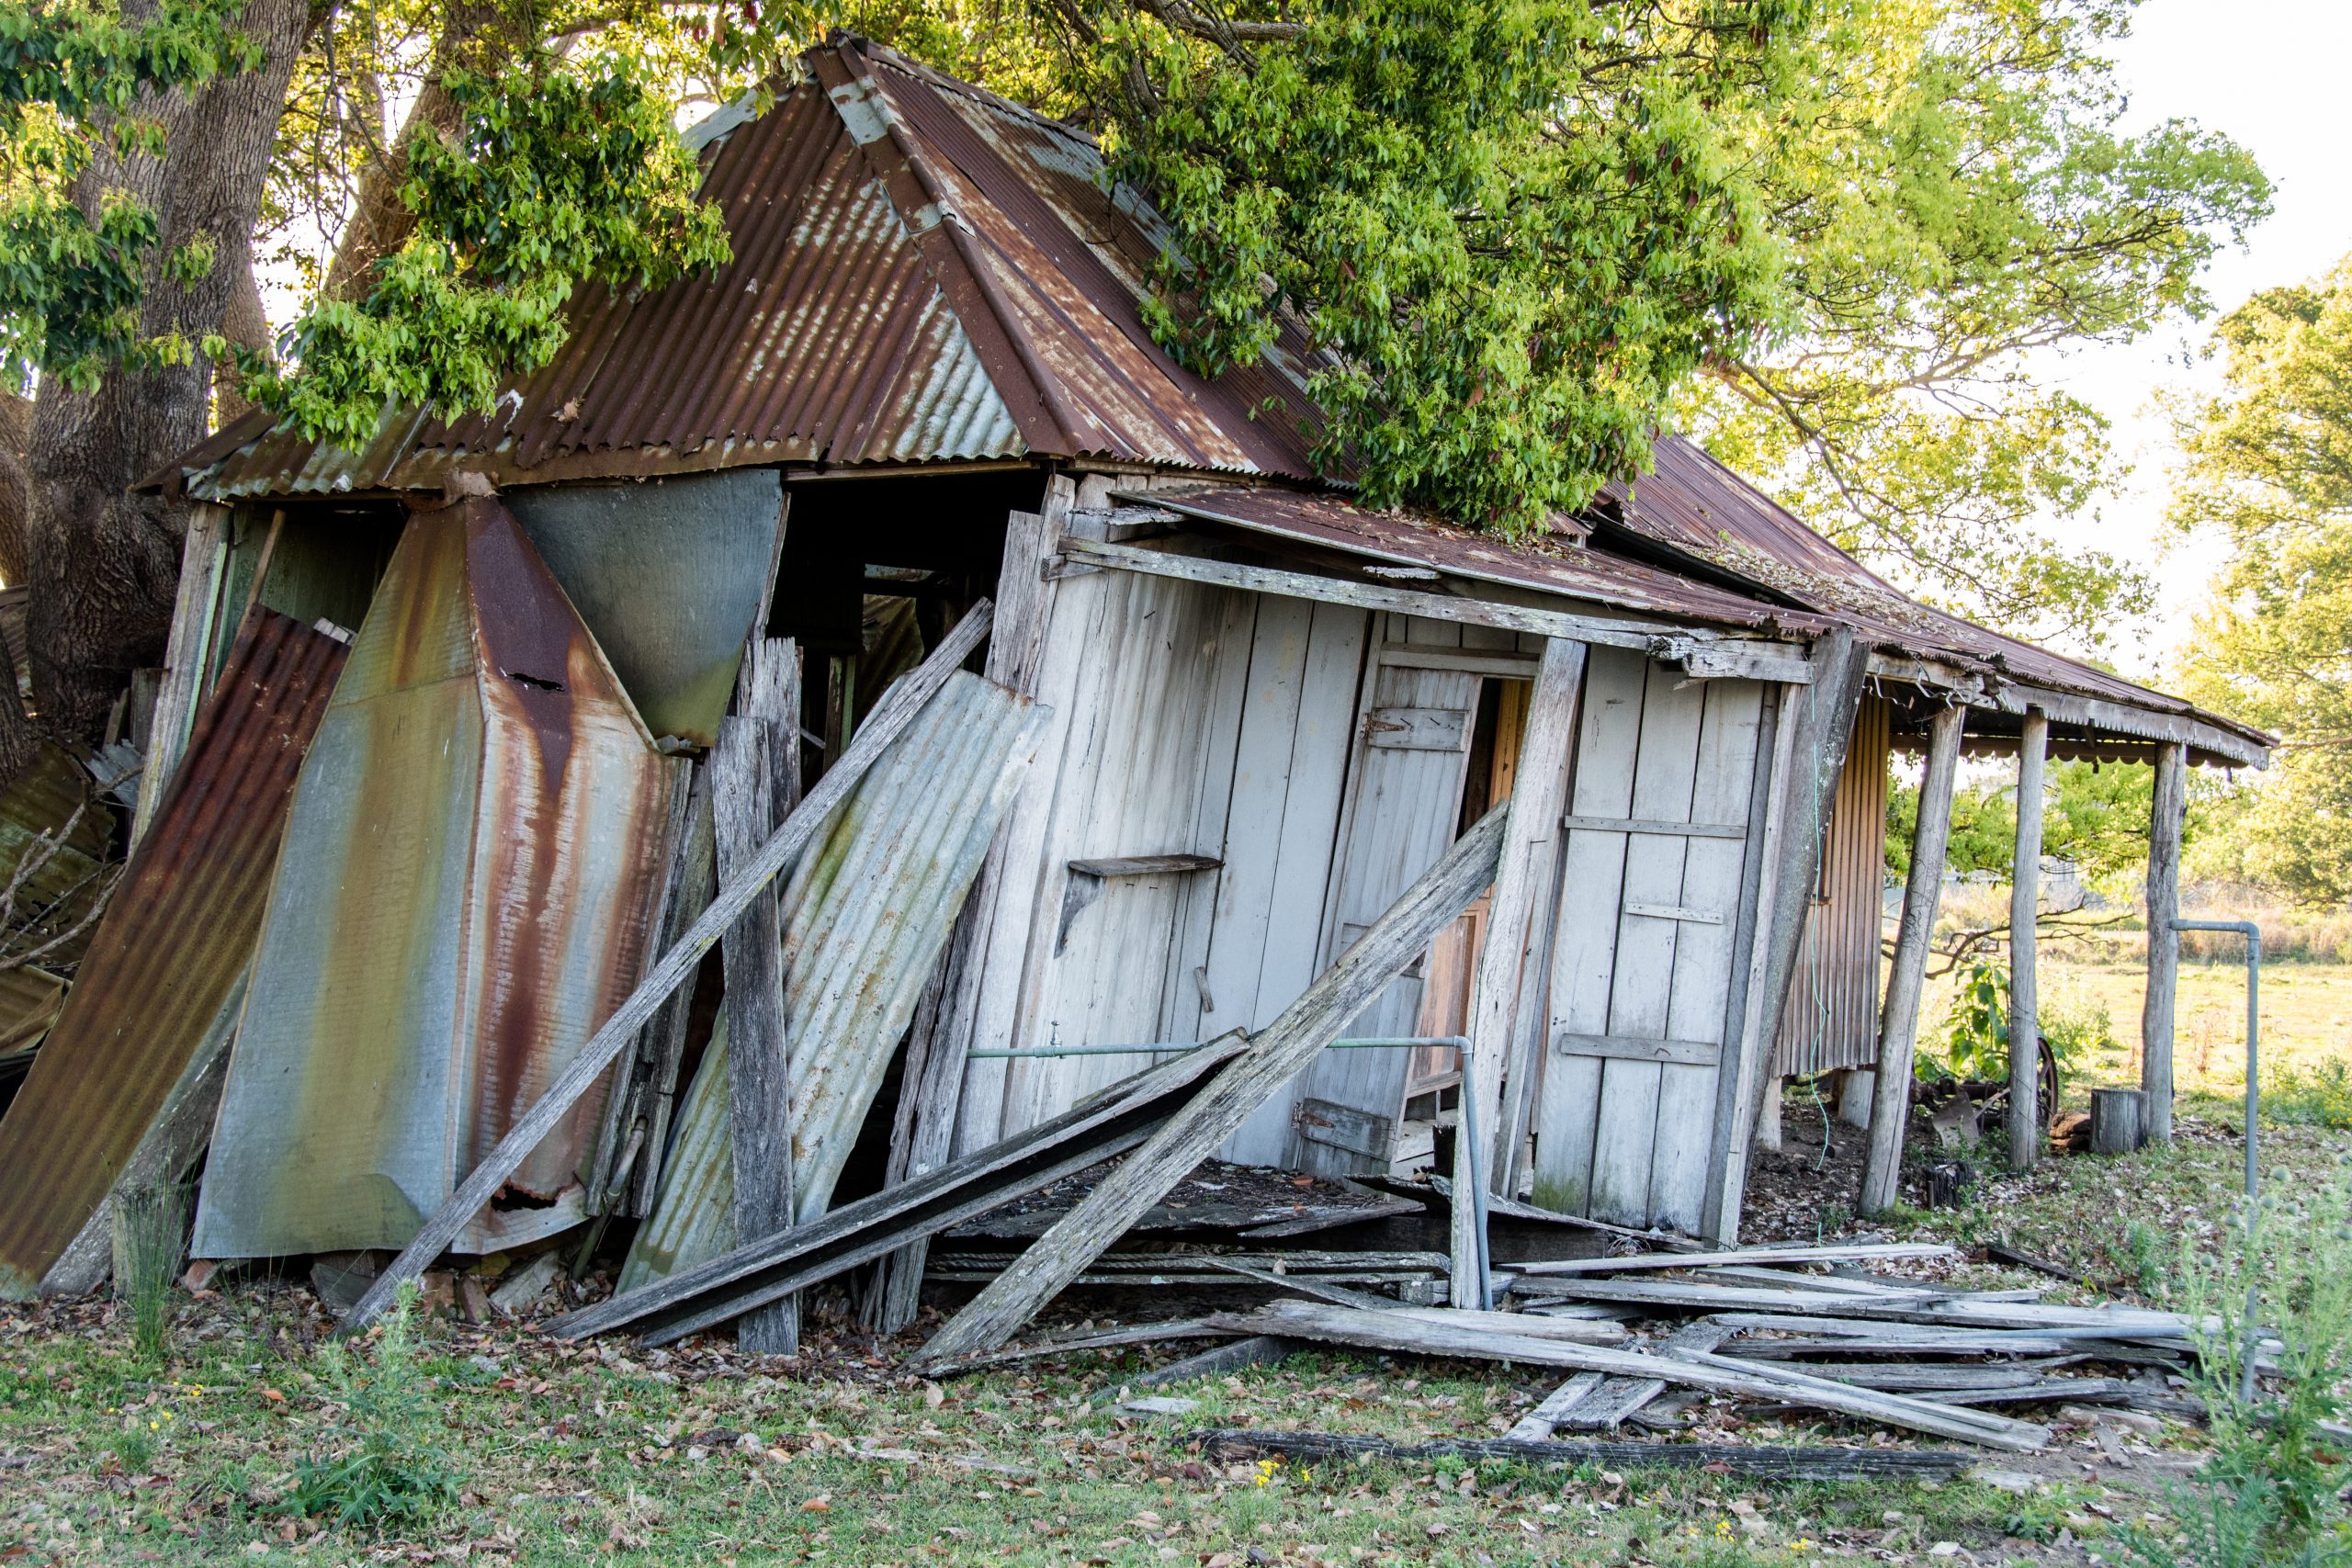 faq - How do get rid of my mobile home? - The junk guys